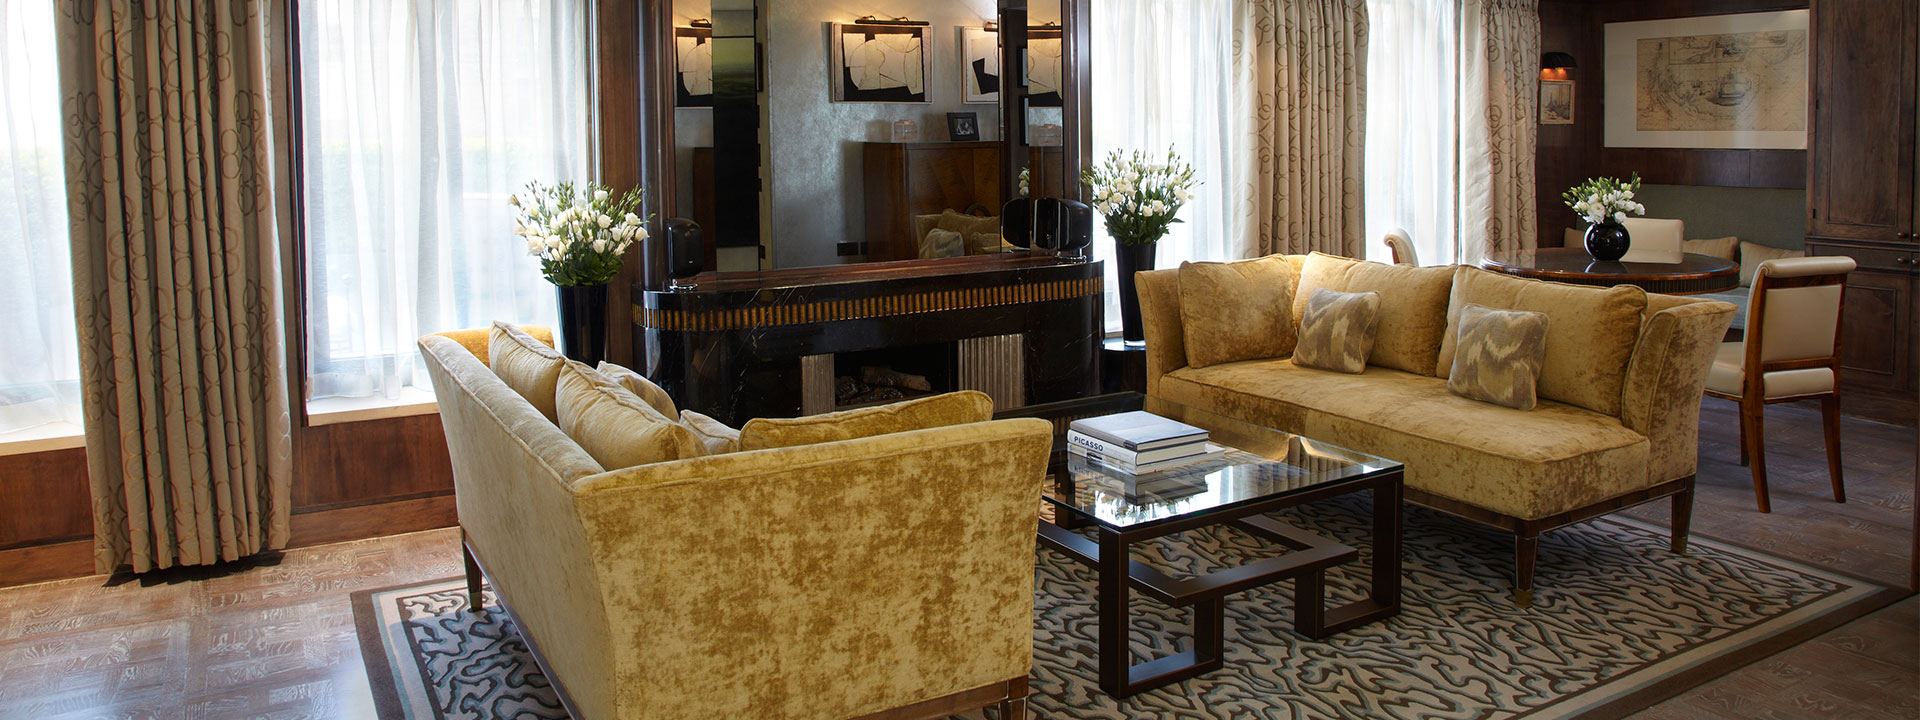 Living room with comfortable yellow sofas in the contemporary Terrace Suite at The Connaught interior.